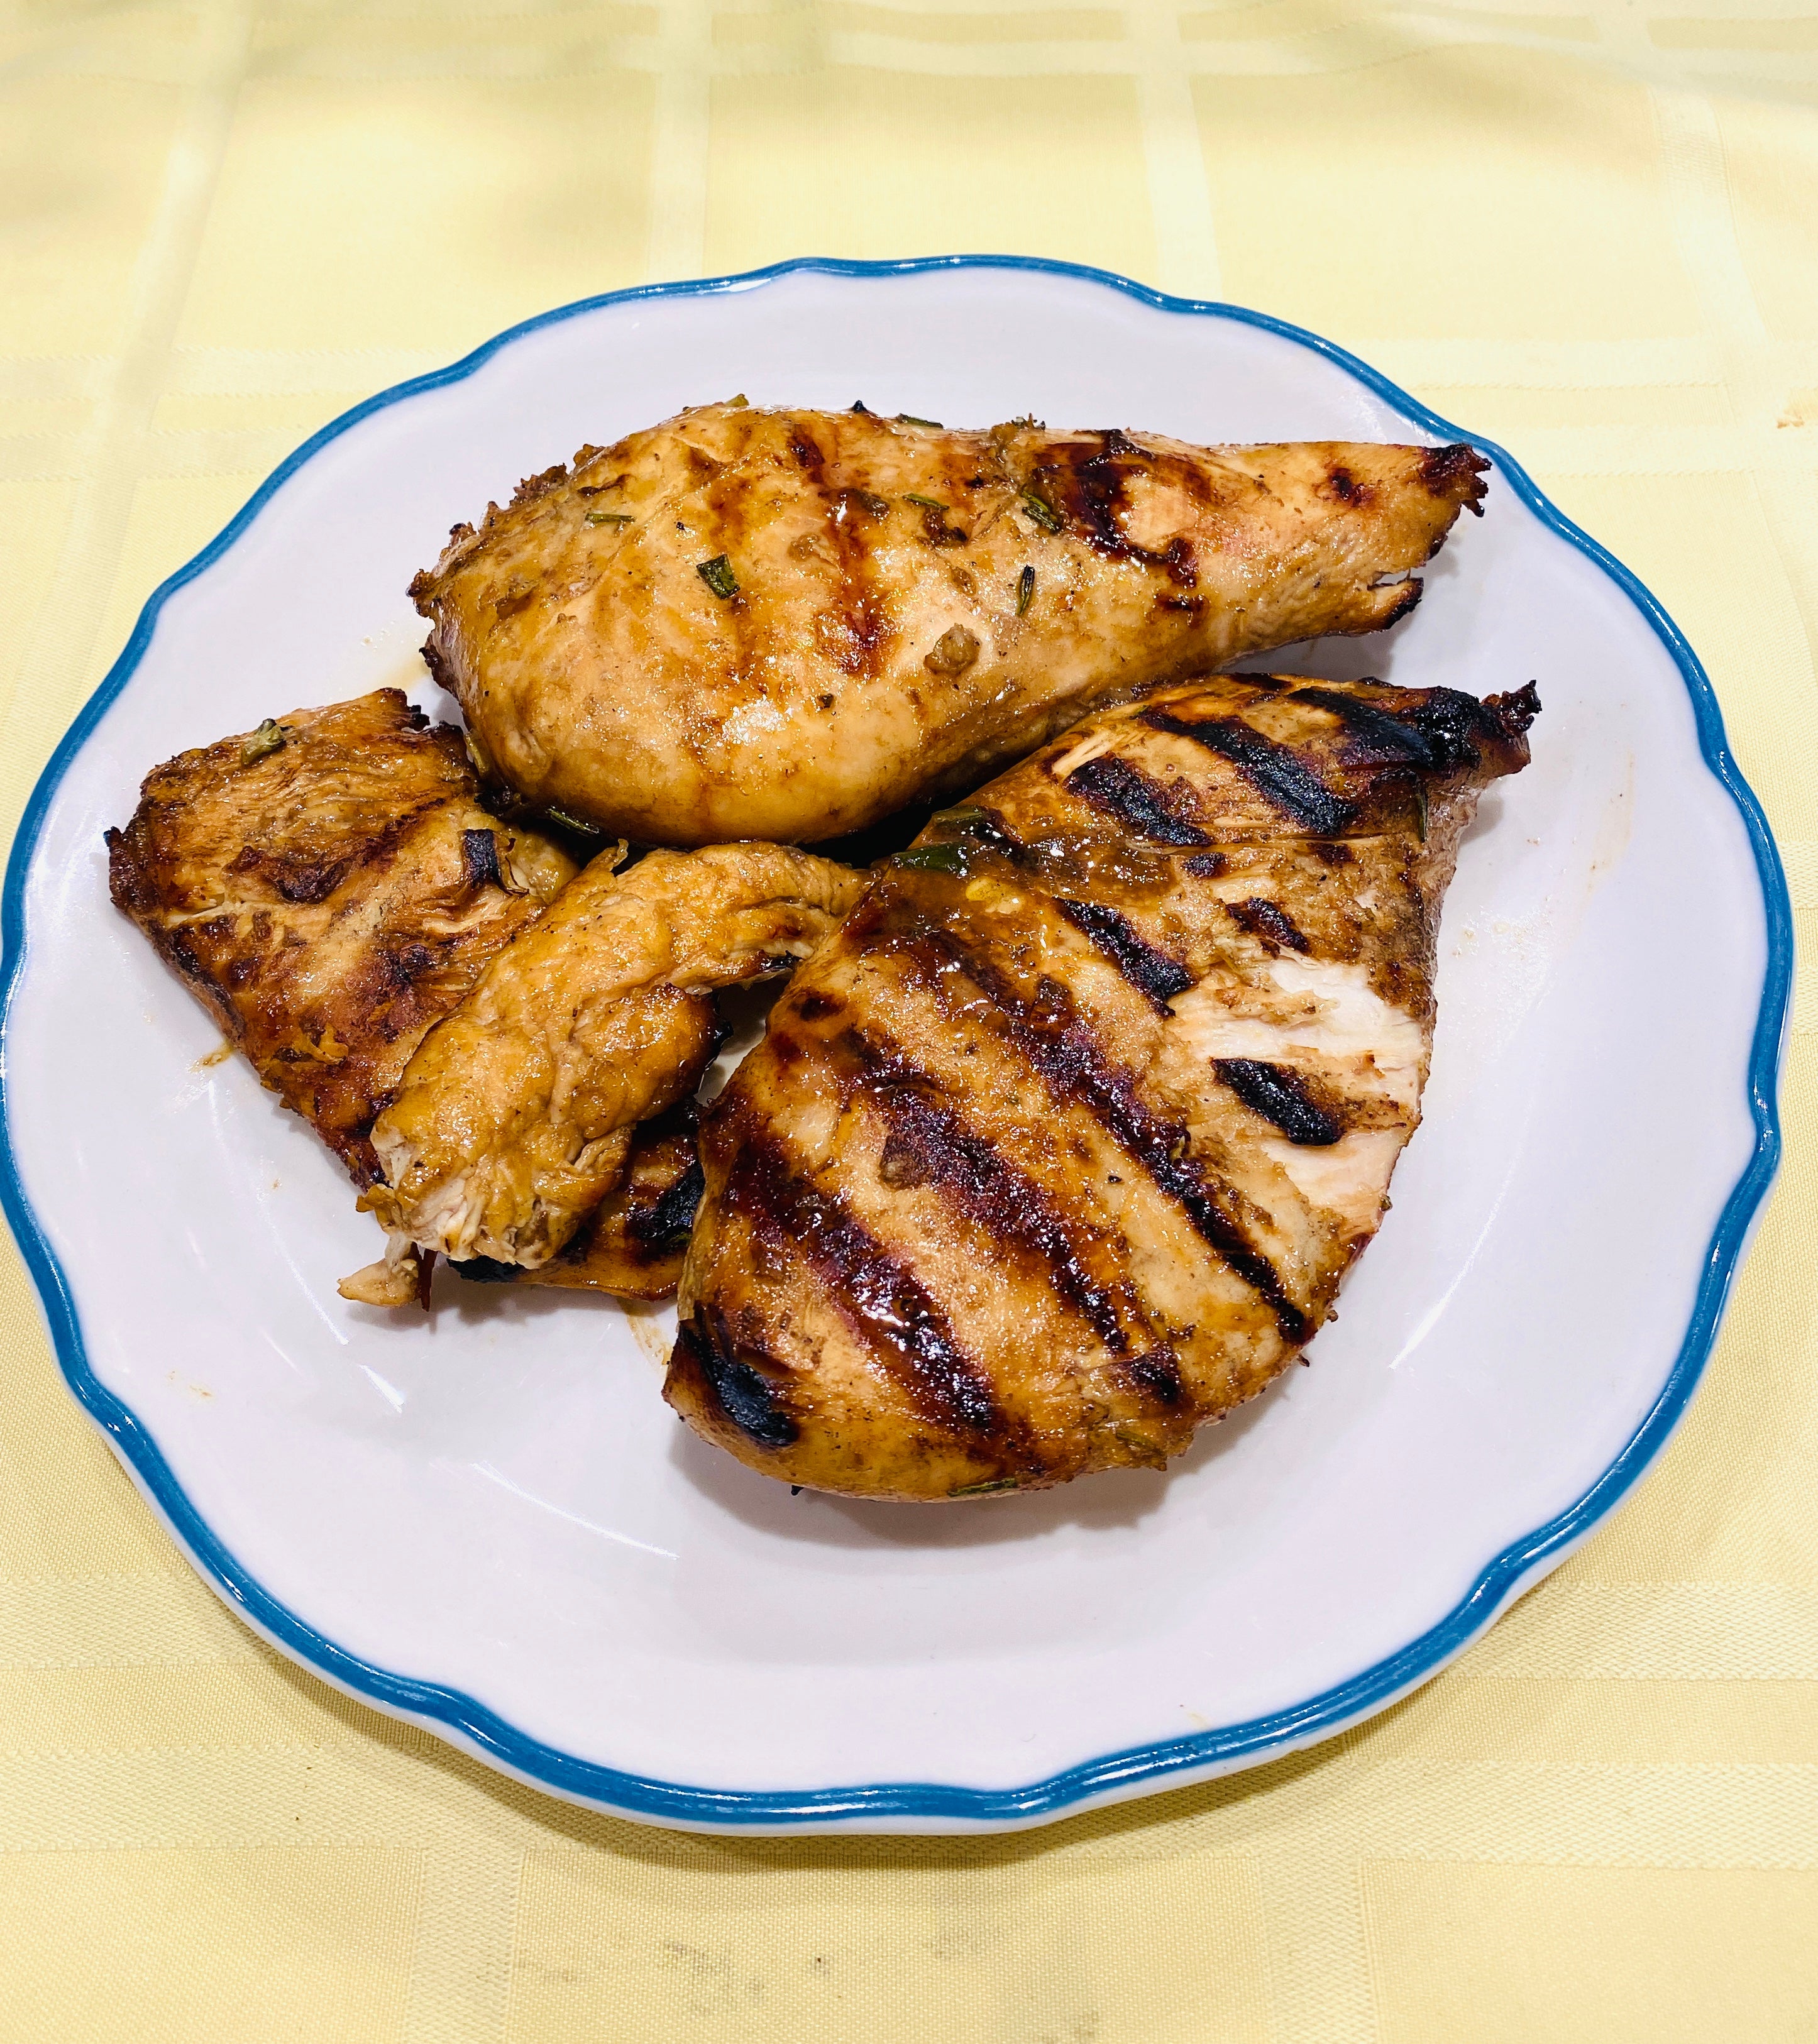 Grilled Chicken with Balsamic Rosemary Marinade